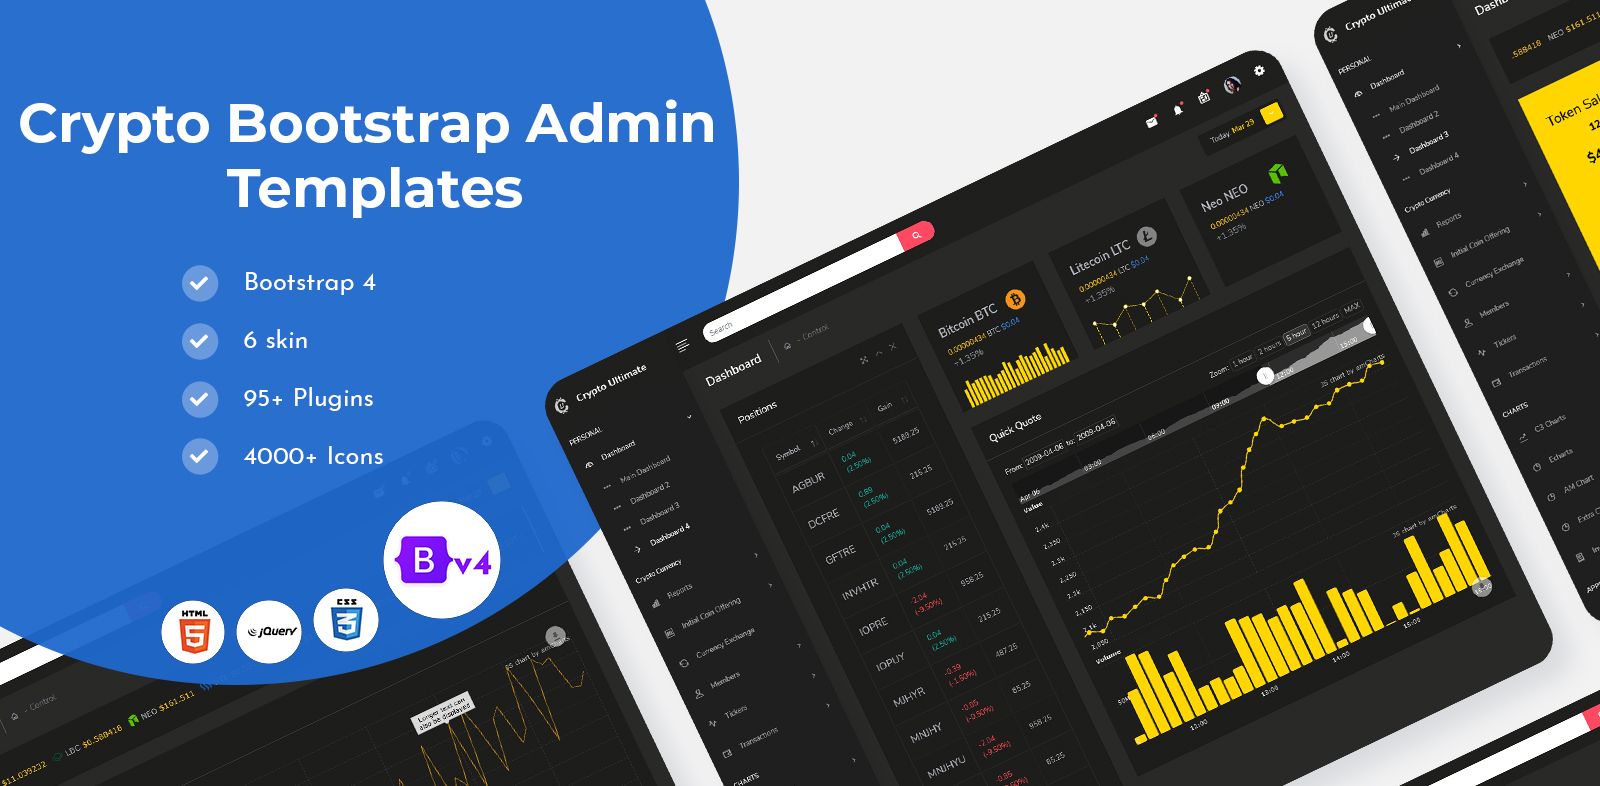 Tokenize CryptoCurrency Admin Templates With Crypto Dashboard UI Kit